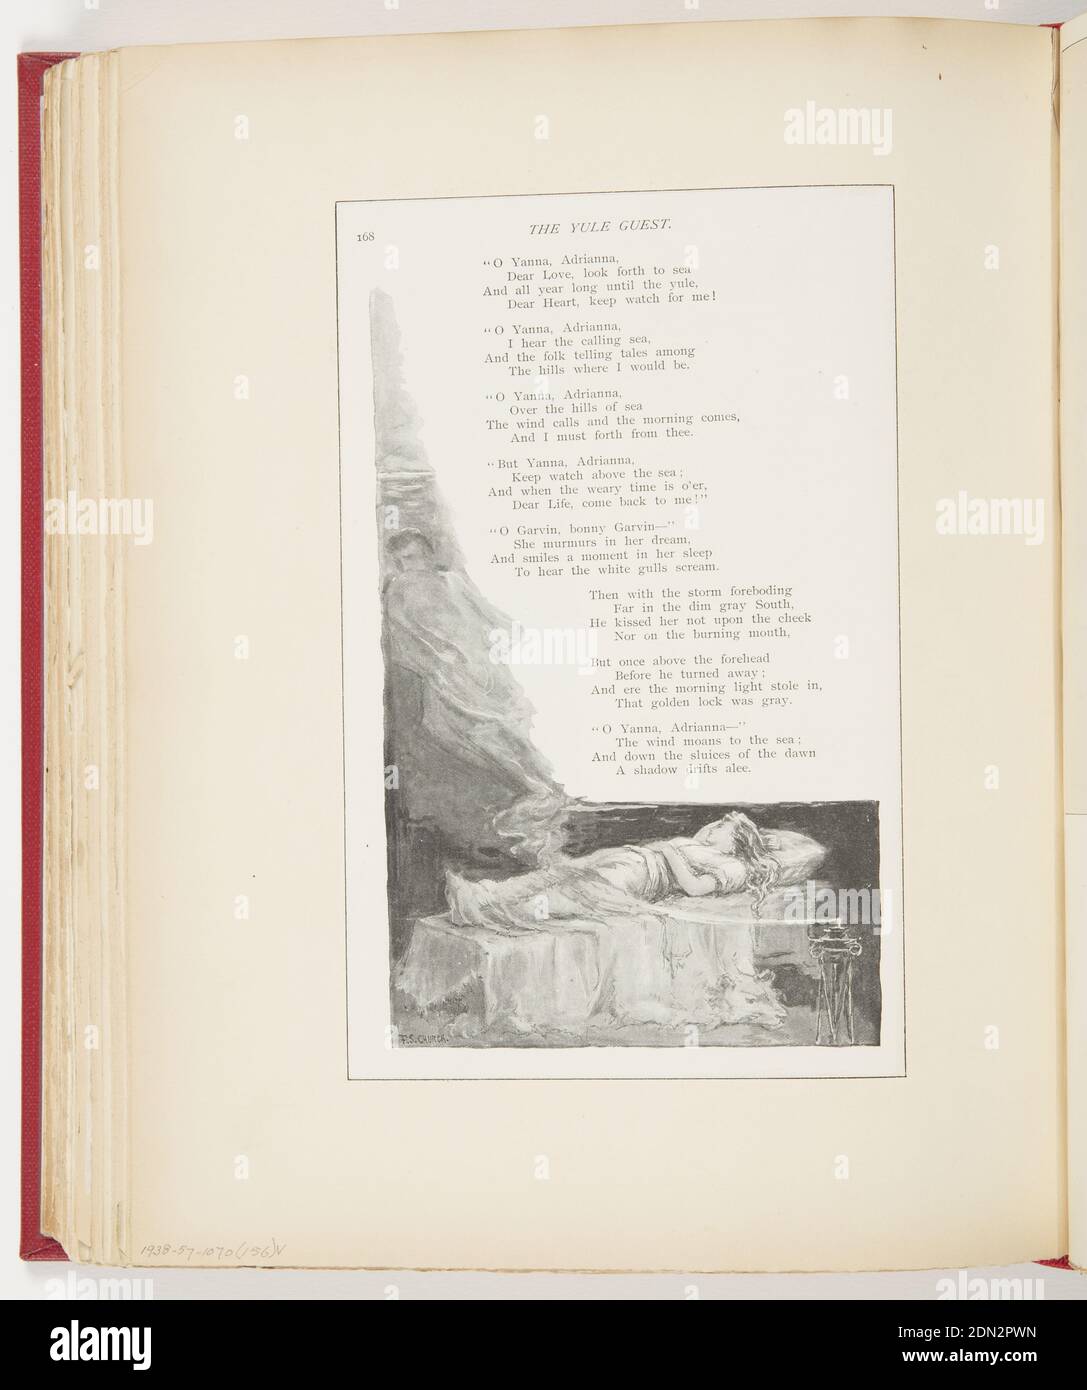 The Yule Guest, Printed in black ink on paper, Left, poem; right, various birds sitting on leafless branches singing, winter, snow on branches., USA, 1892, ephemera, Ephemera, Ephemera Stock Photo